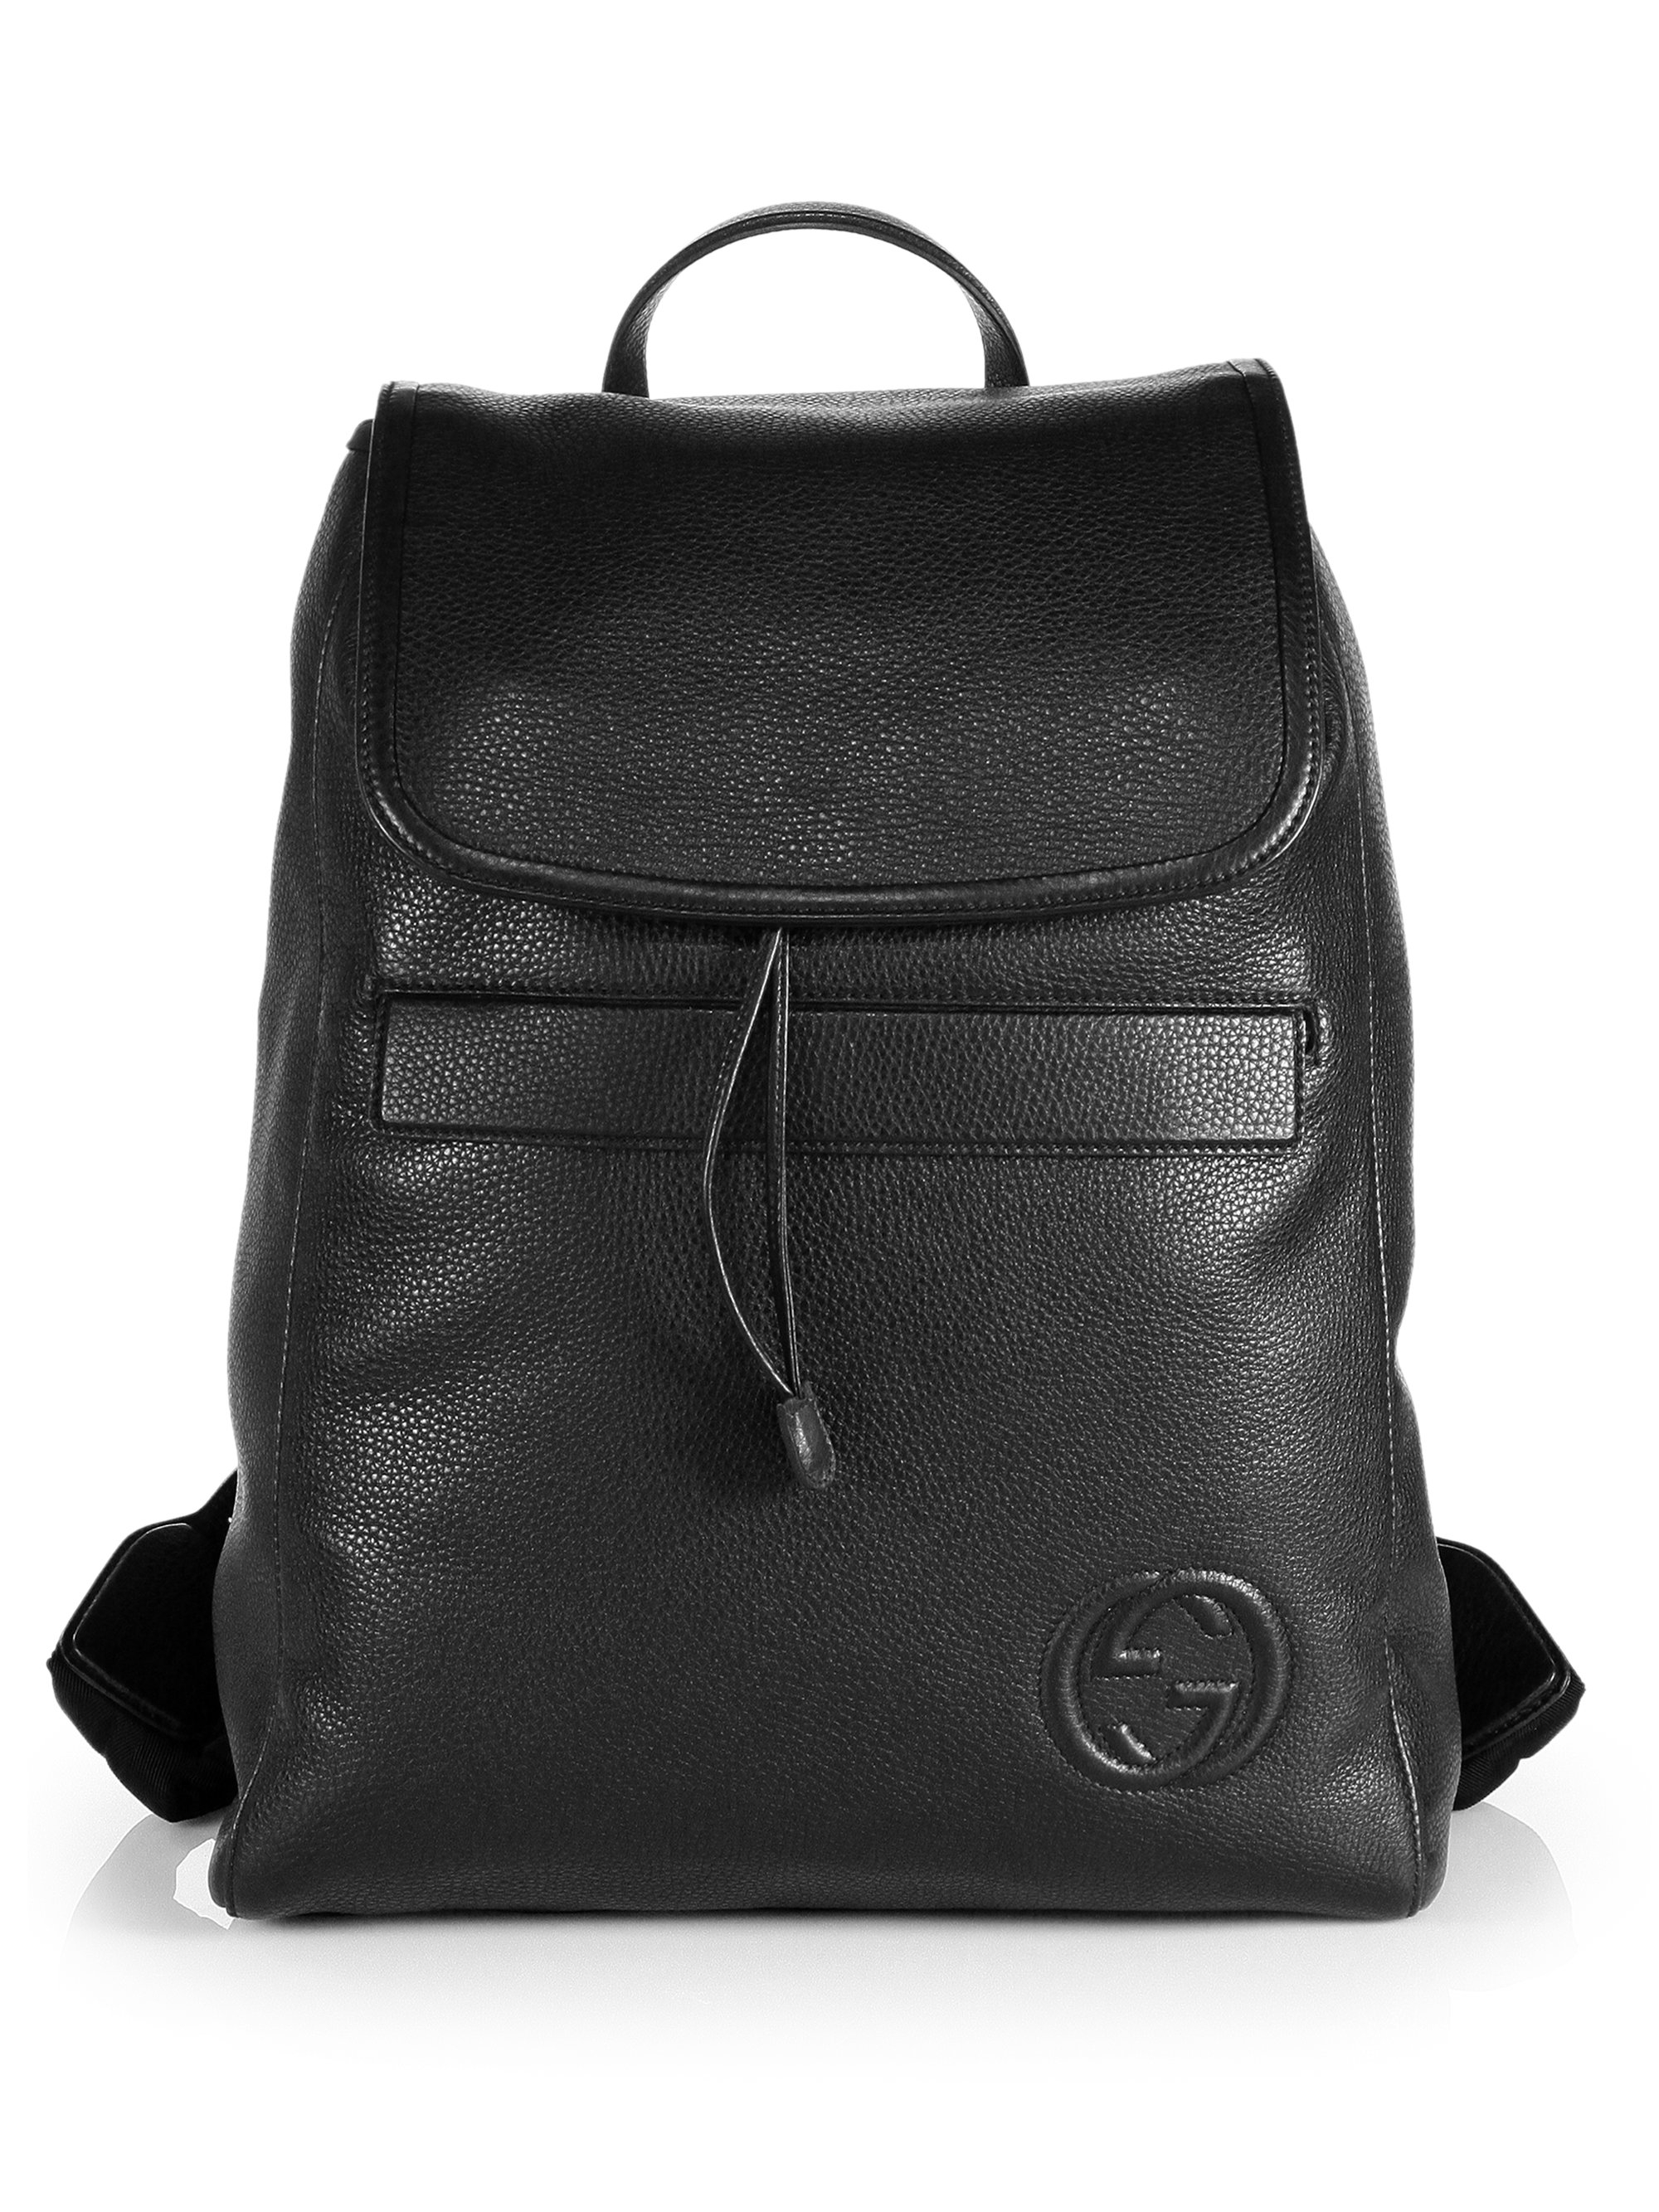 Gucci Leather Backpack in Black for Men - Lyst